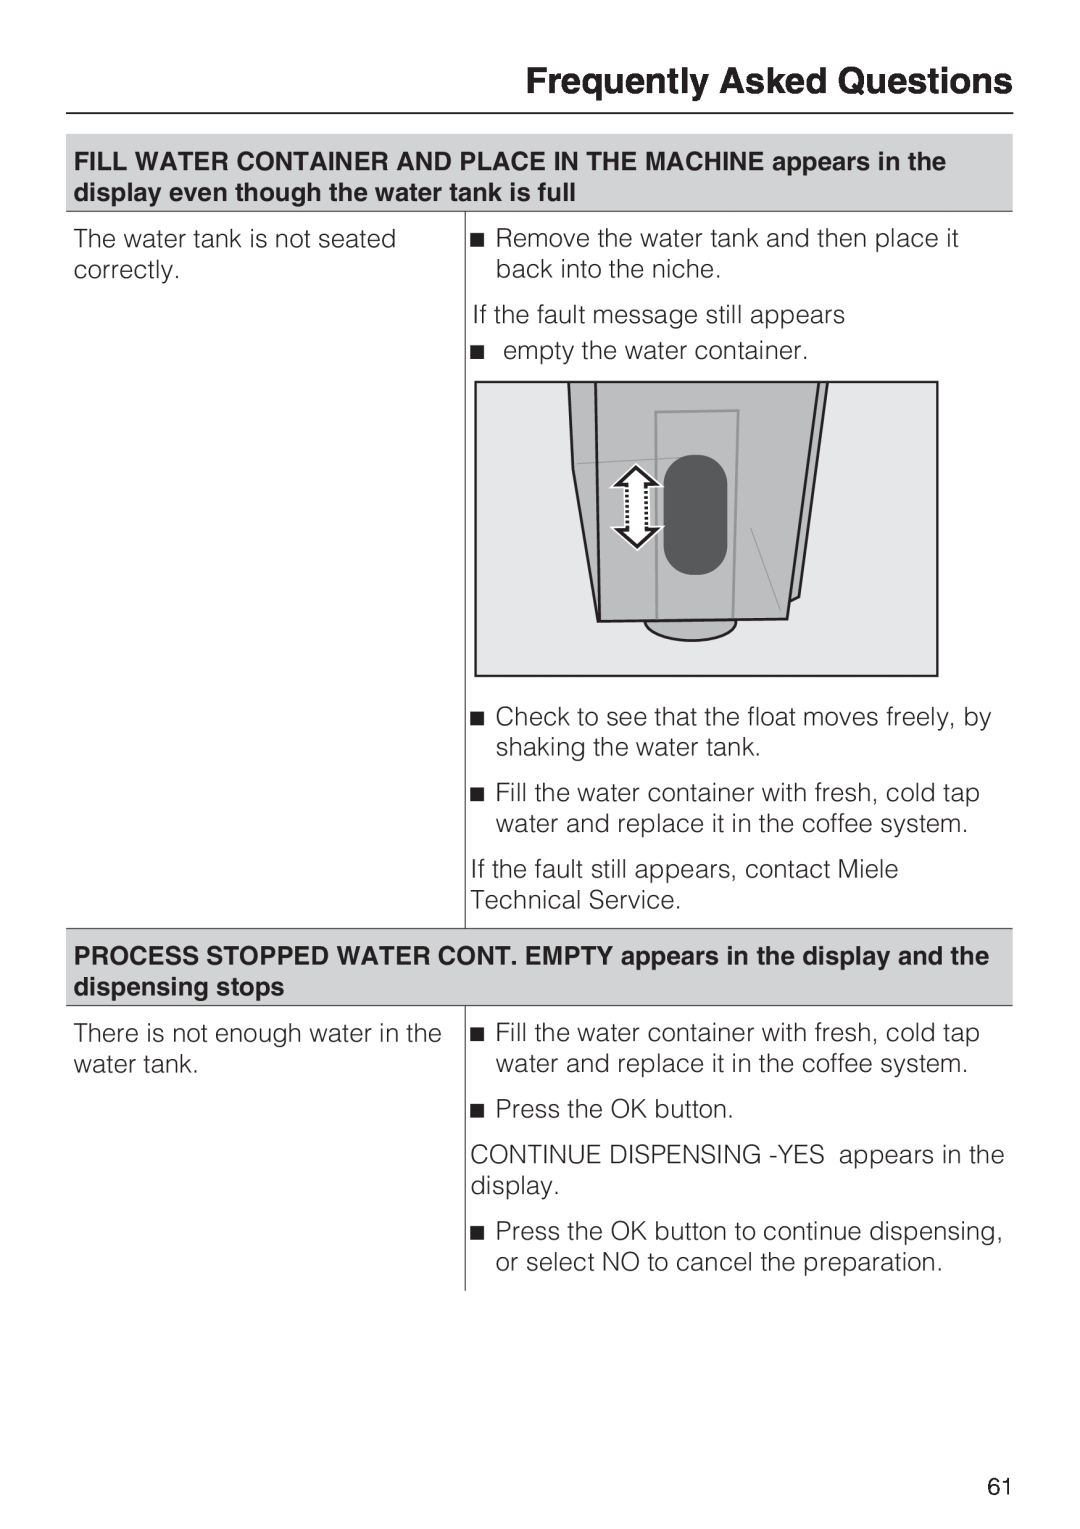 Miele 7995311, CM 5100 manual Frequently Asked Questions, The water tank is not seated correctly 